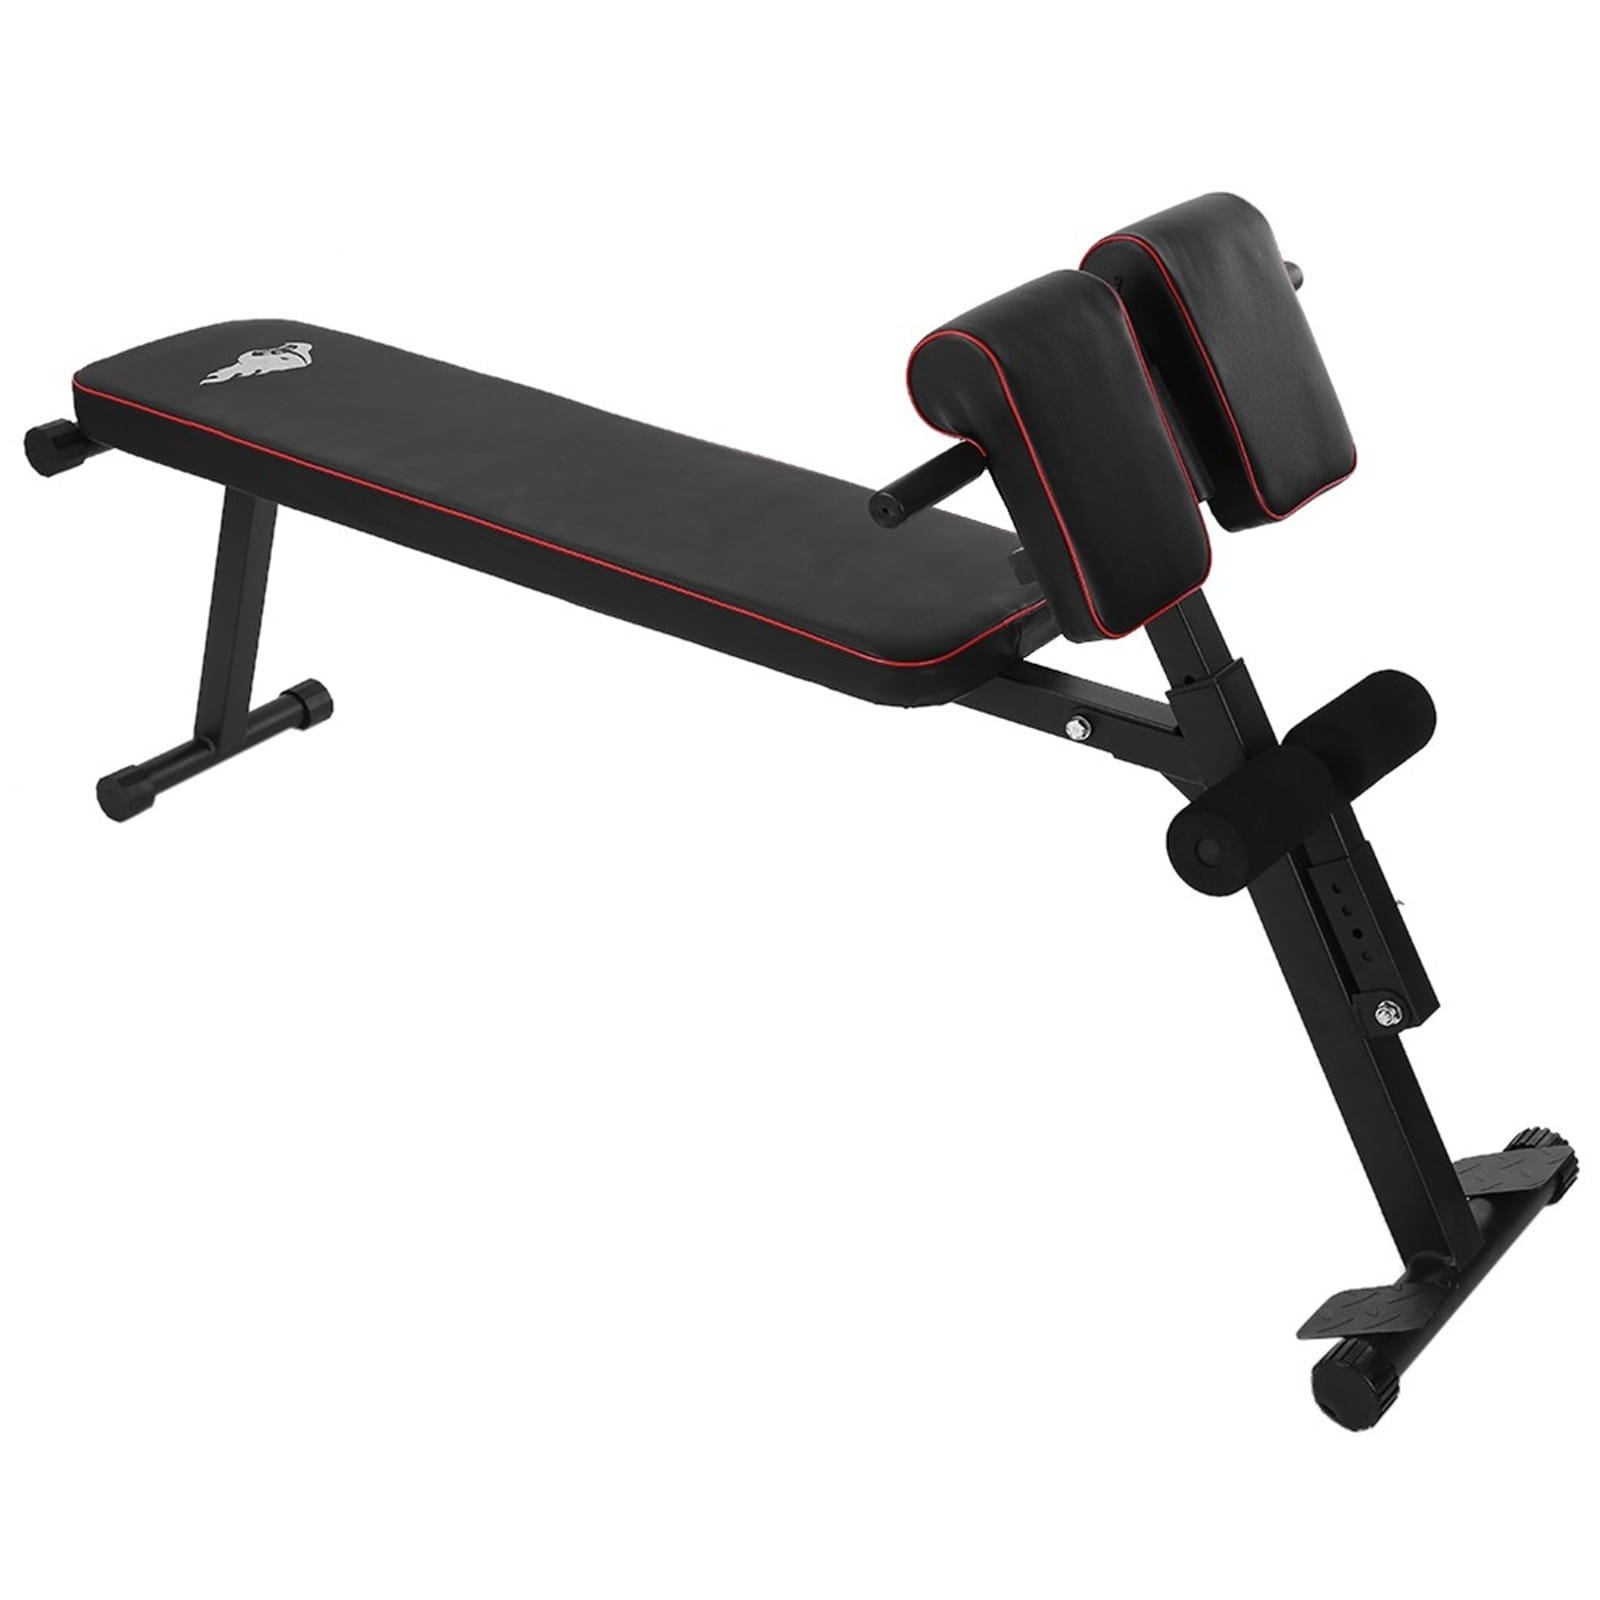 JOMEED Multi Functional Training Weight Bench for at Home Full Body Workout